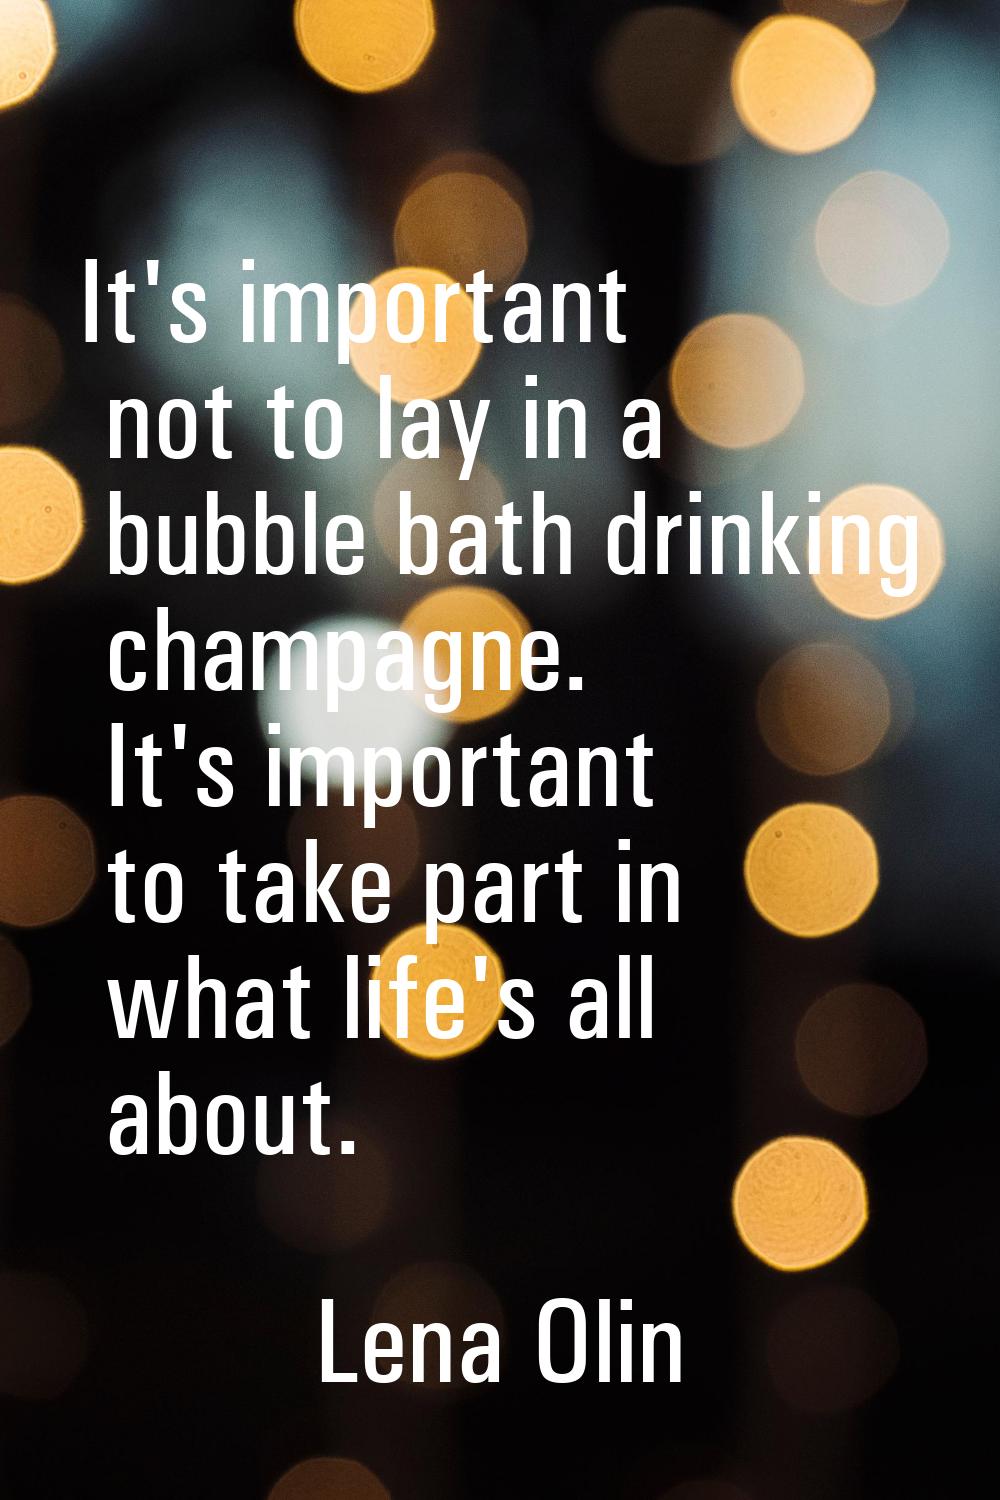 It's important not to lay in a bubble bath drinking champagne. It's important to take part in what 